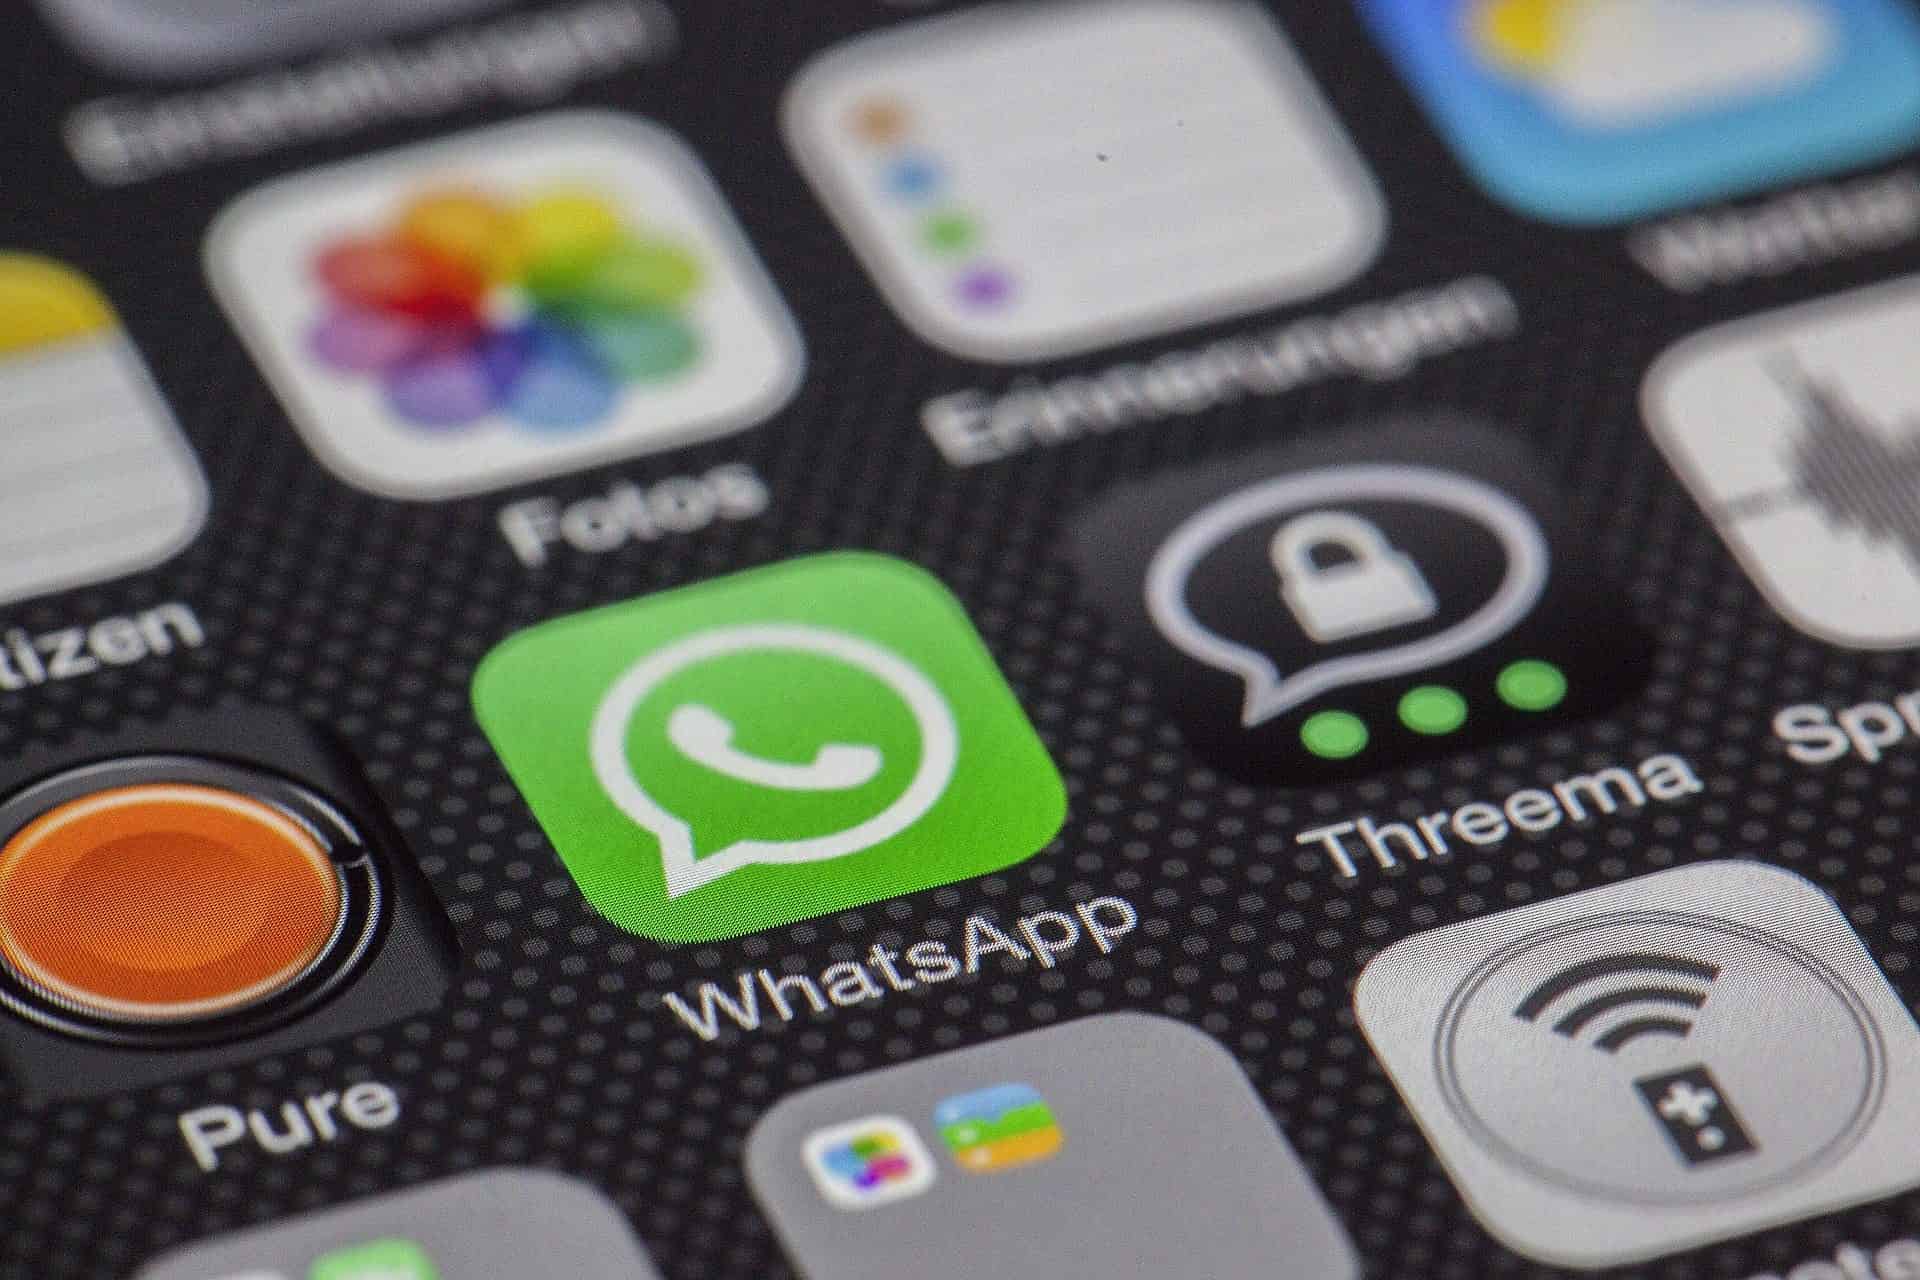 WhatsApp may soon allow you to share status updates to Facebook automatically